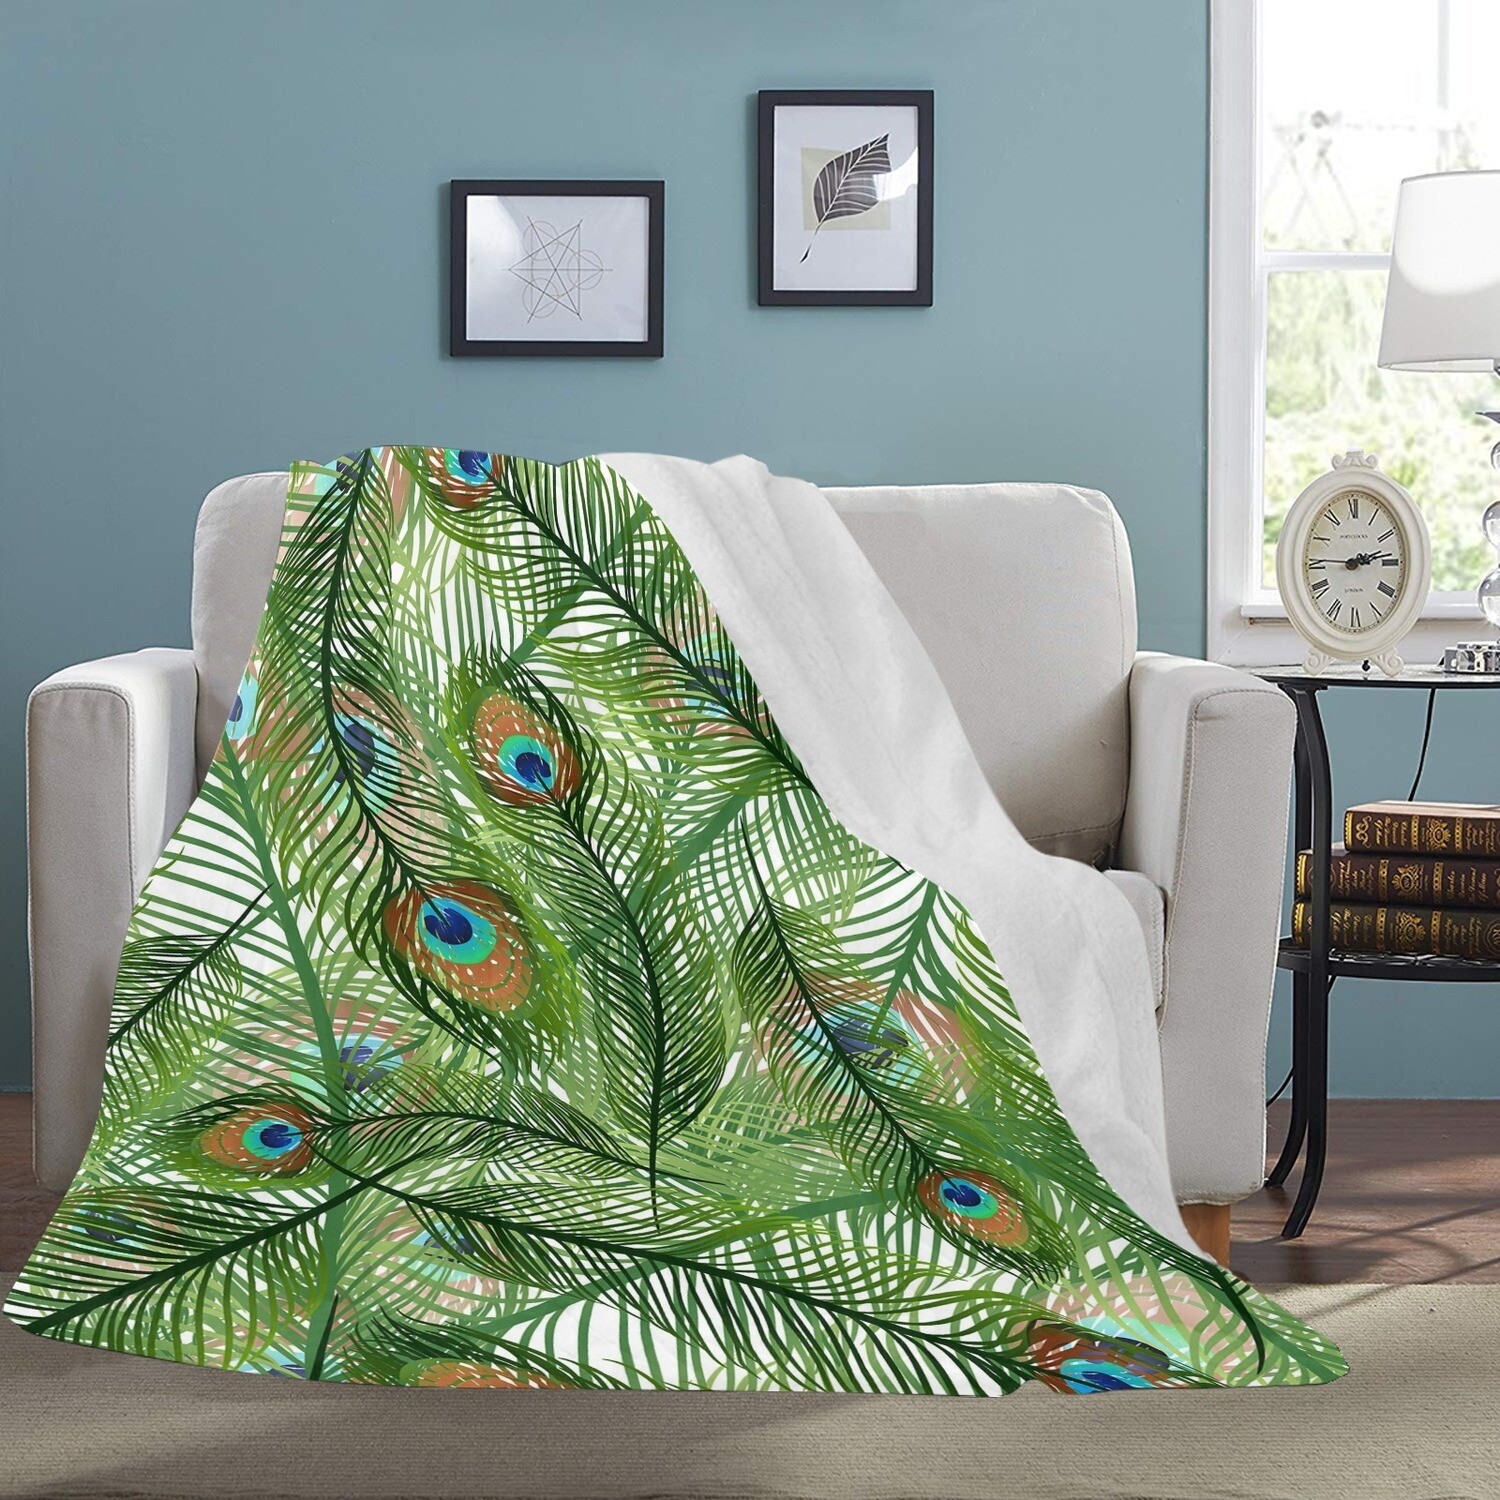 🤴🏽👸🏽🦚Large Ultra-Soft Micro Fleece Blanket Peacock feathers, Animals' print, gift, gift for her, gift for him, gift for them, 70"x80"